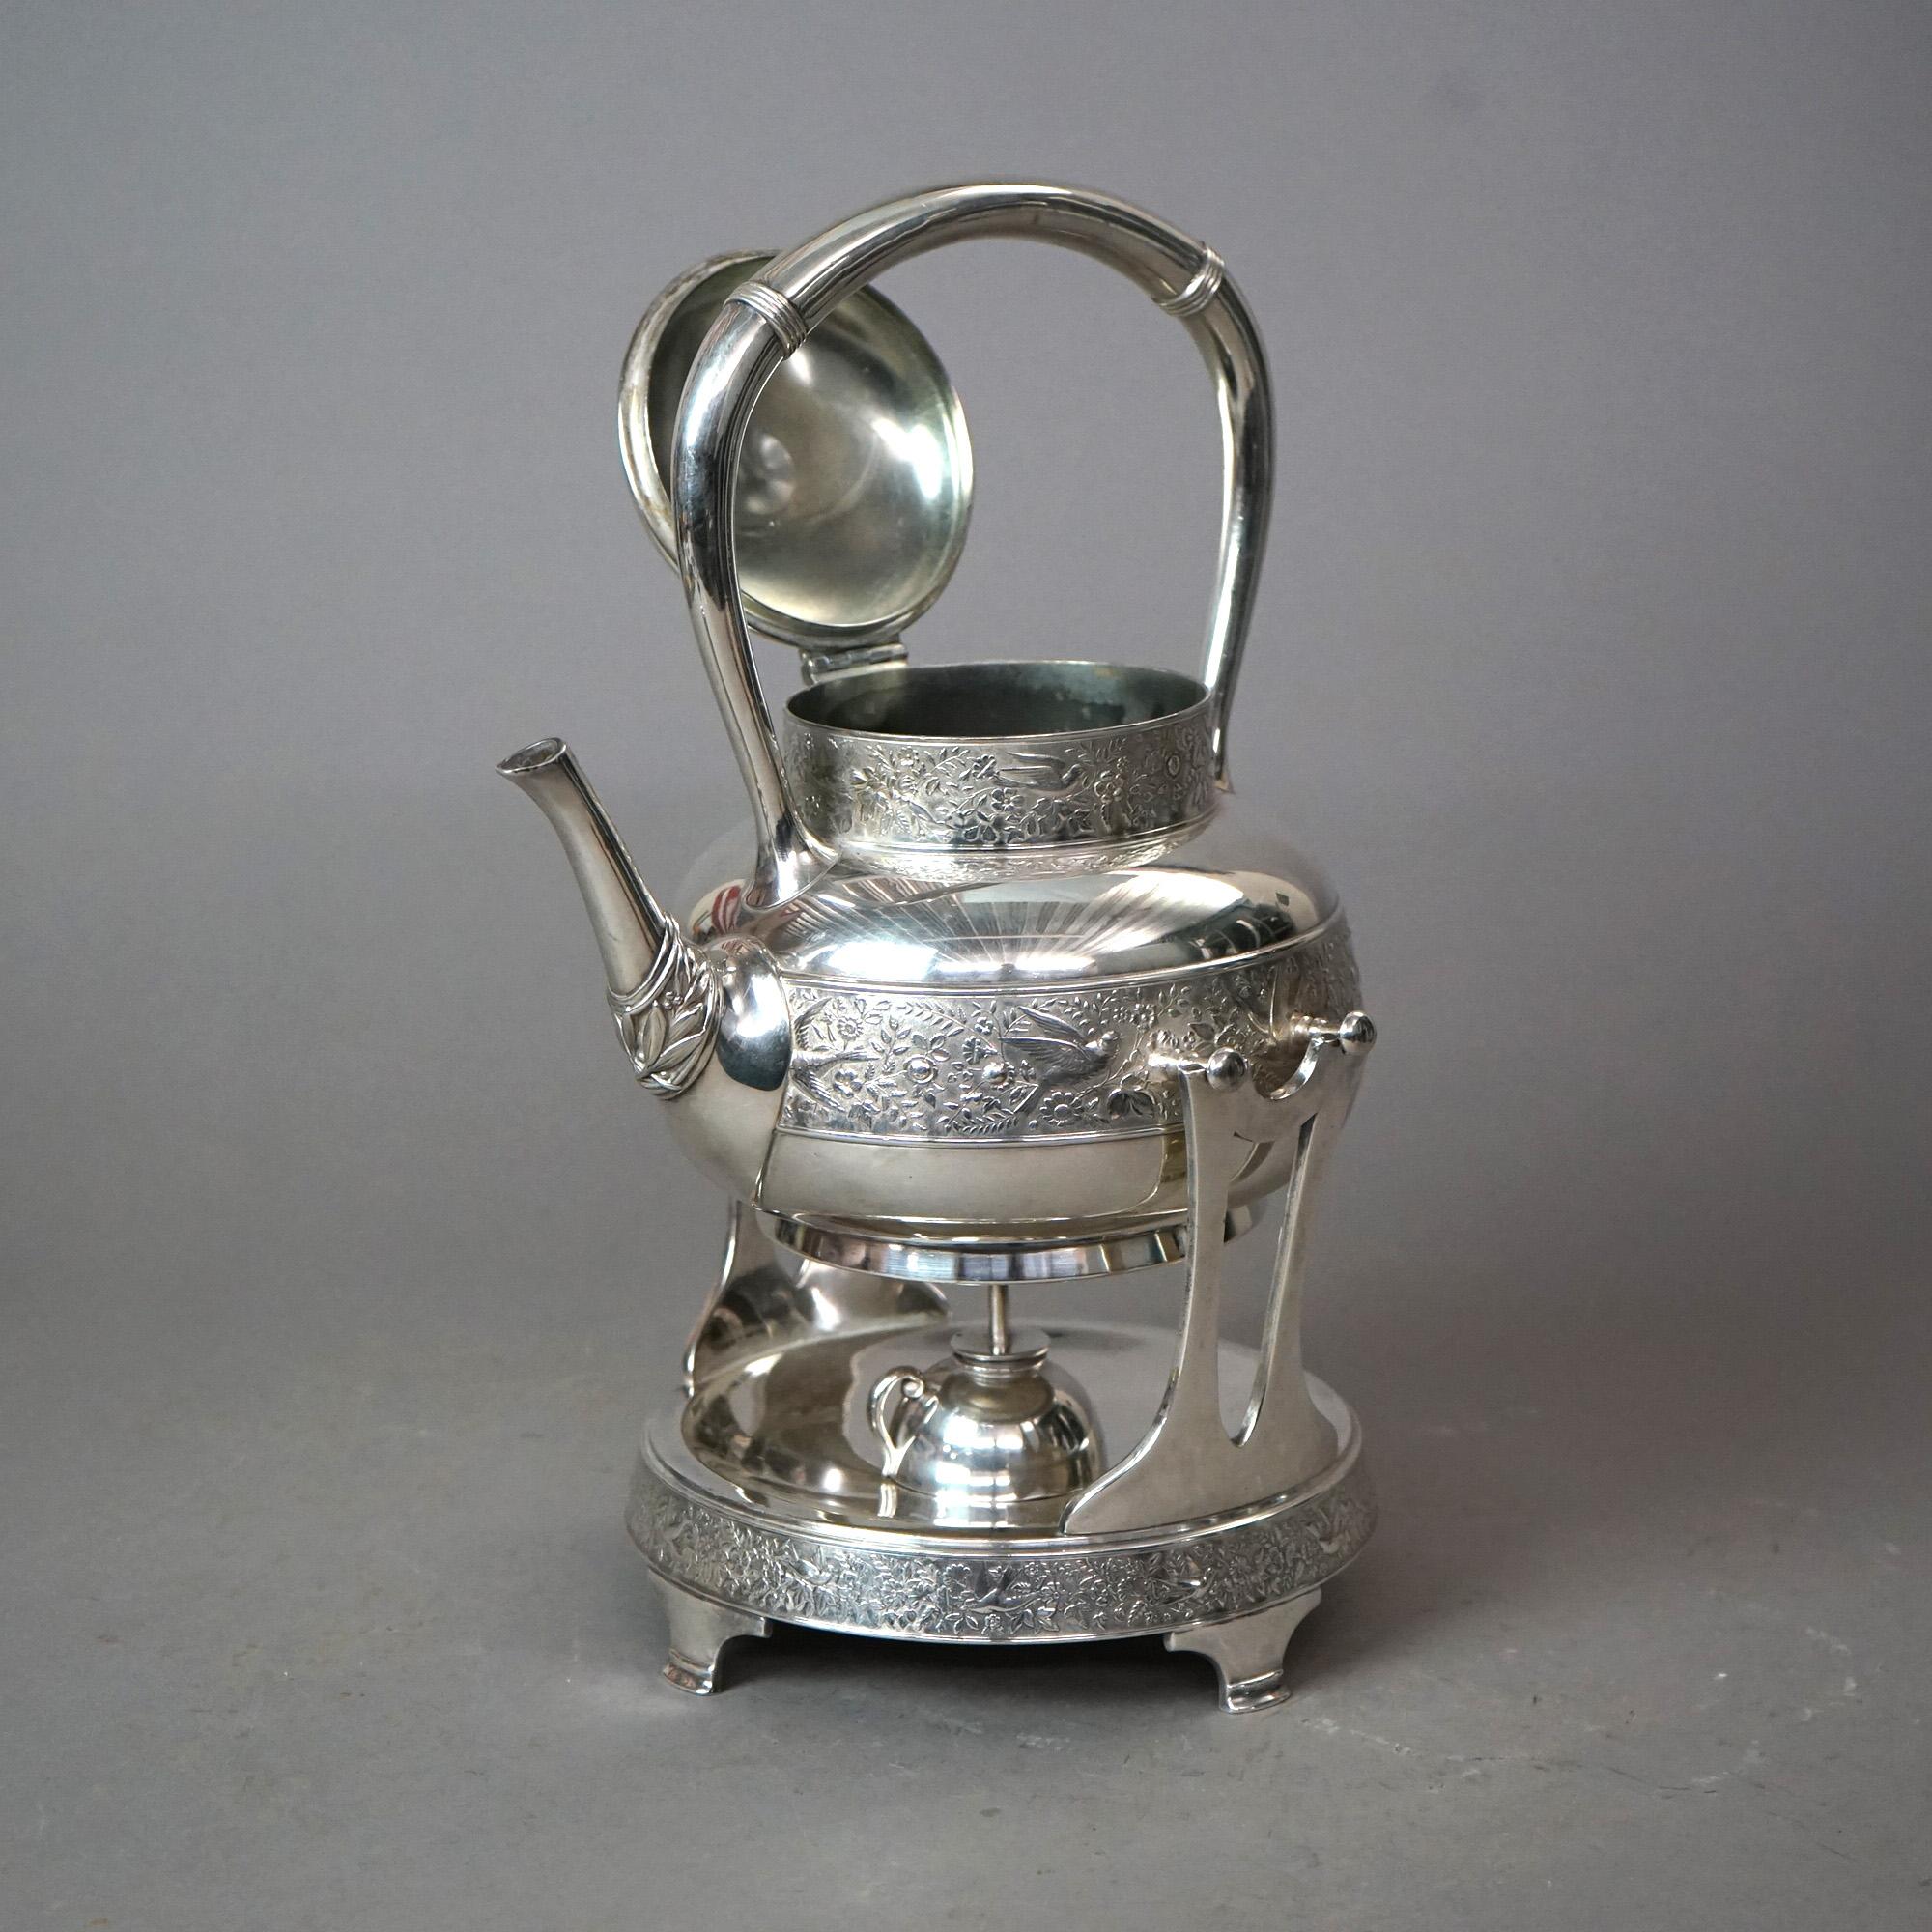 Antique Rogers Aesthetic Silver Plated Tilting Teapot & Stand with Birds C1870 In Good Condition For Sale In Big Flats, NY